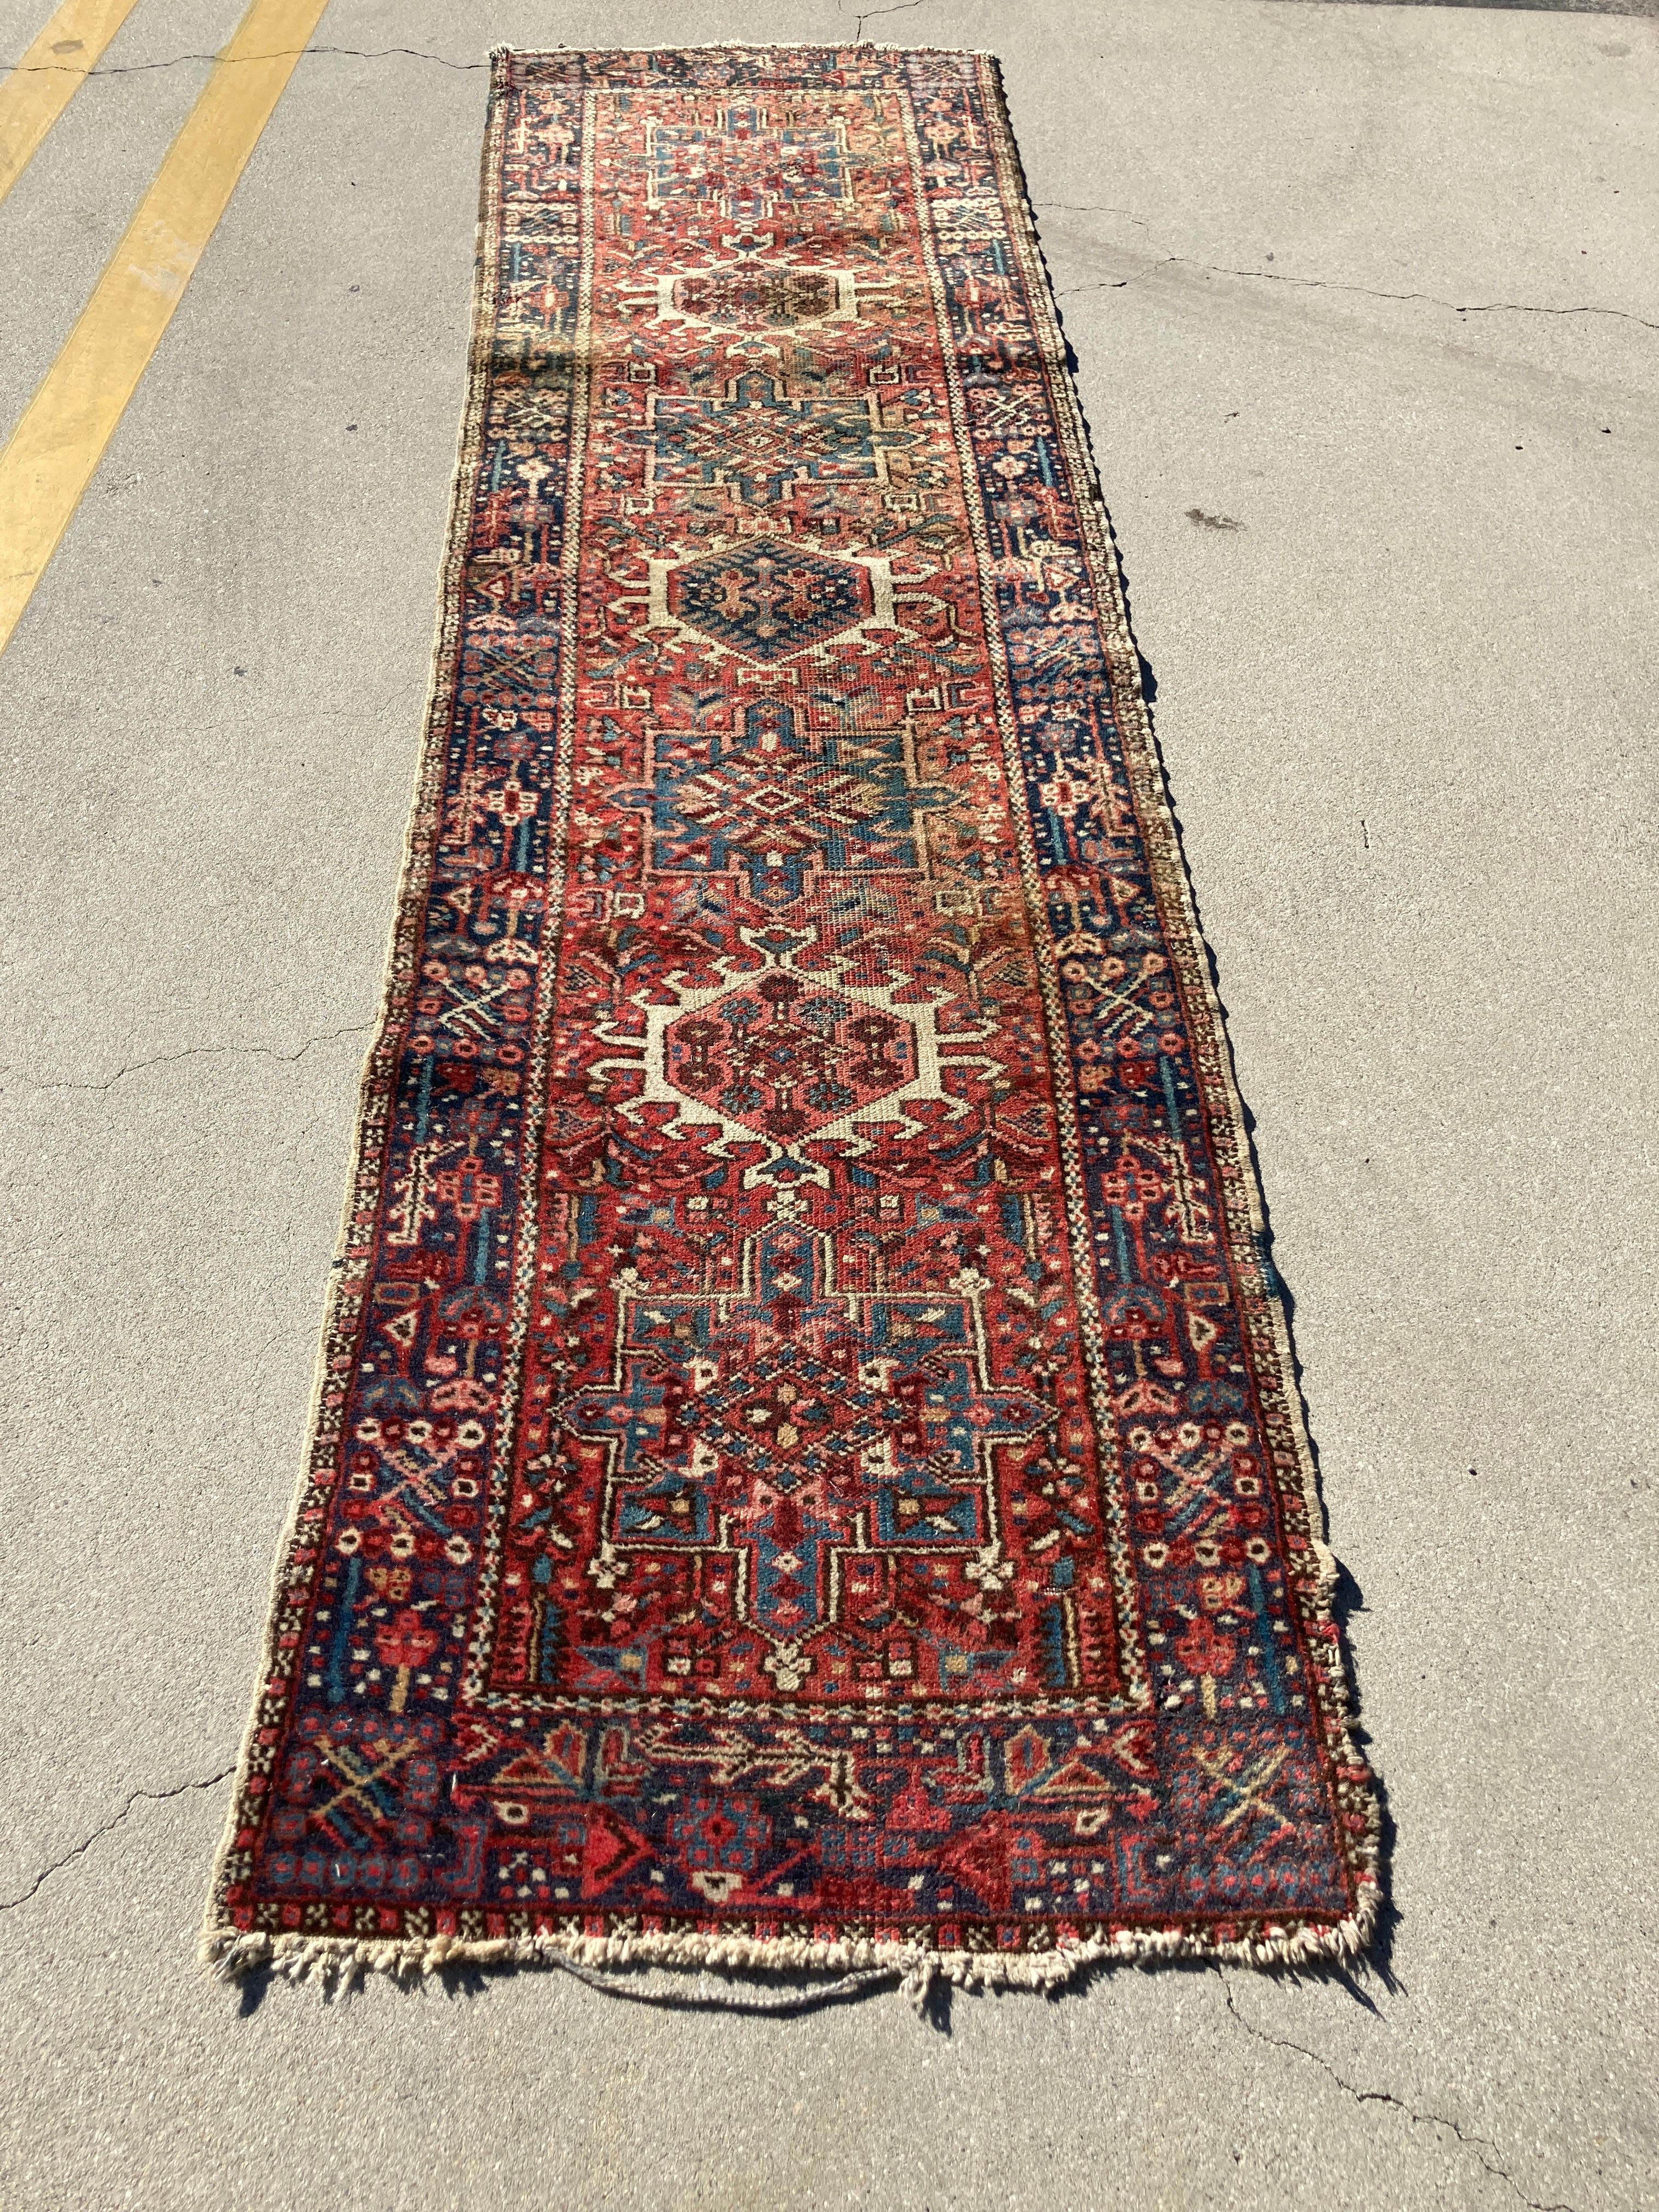 Hand knotted Moorish style runner from Eastern Turkey,
Vintage Middle Eastern rug, circa 1940. 
Size: 2ft 9 in x 10ft 7in. 
Traditional Moorish Turkish carpet with geometric design in deep blue and red colors.